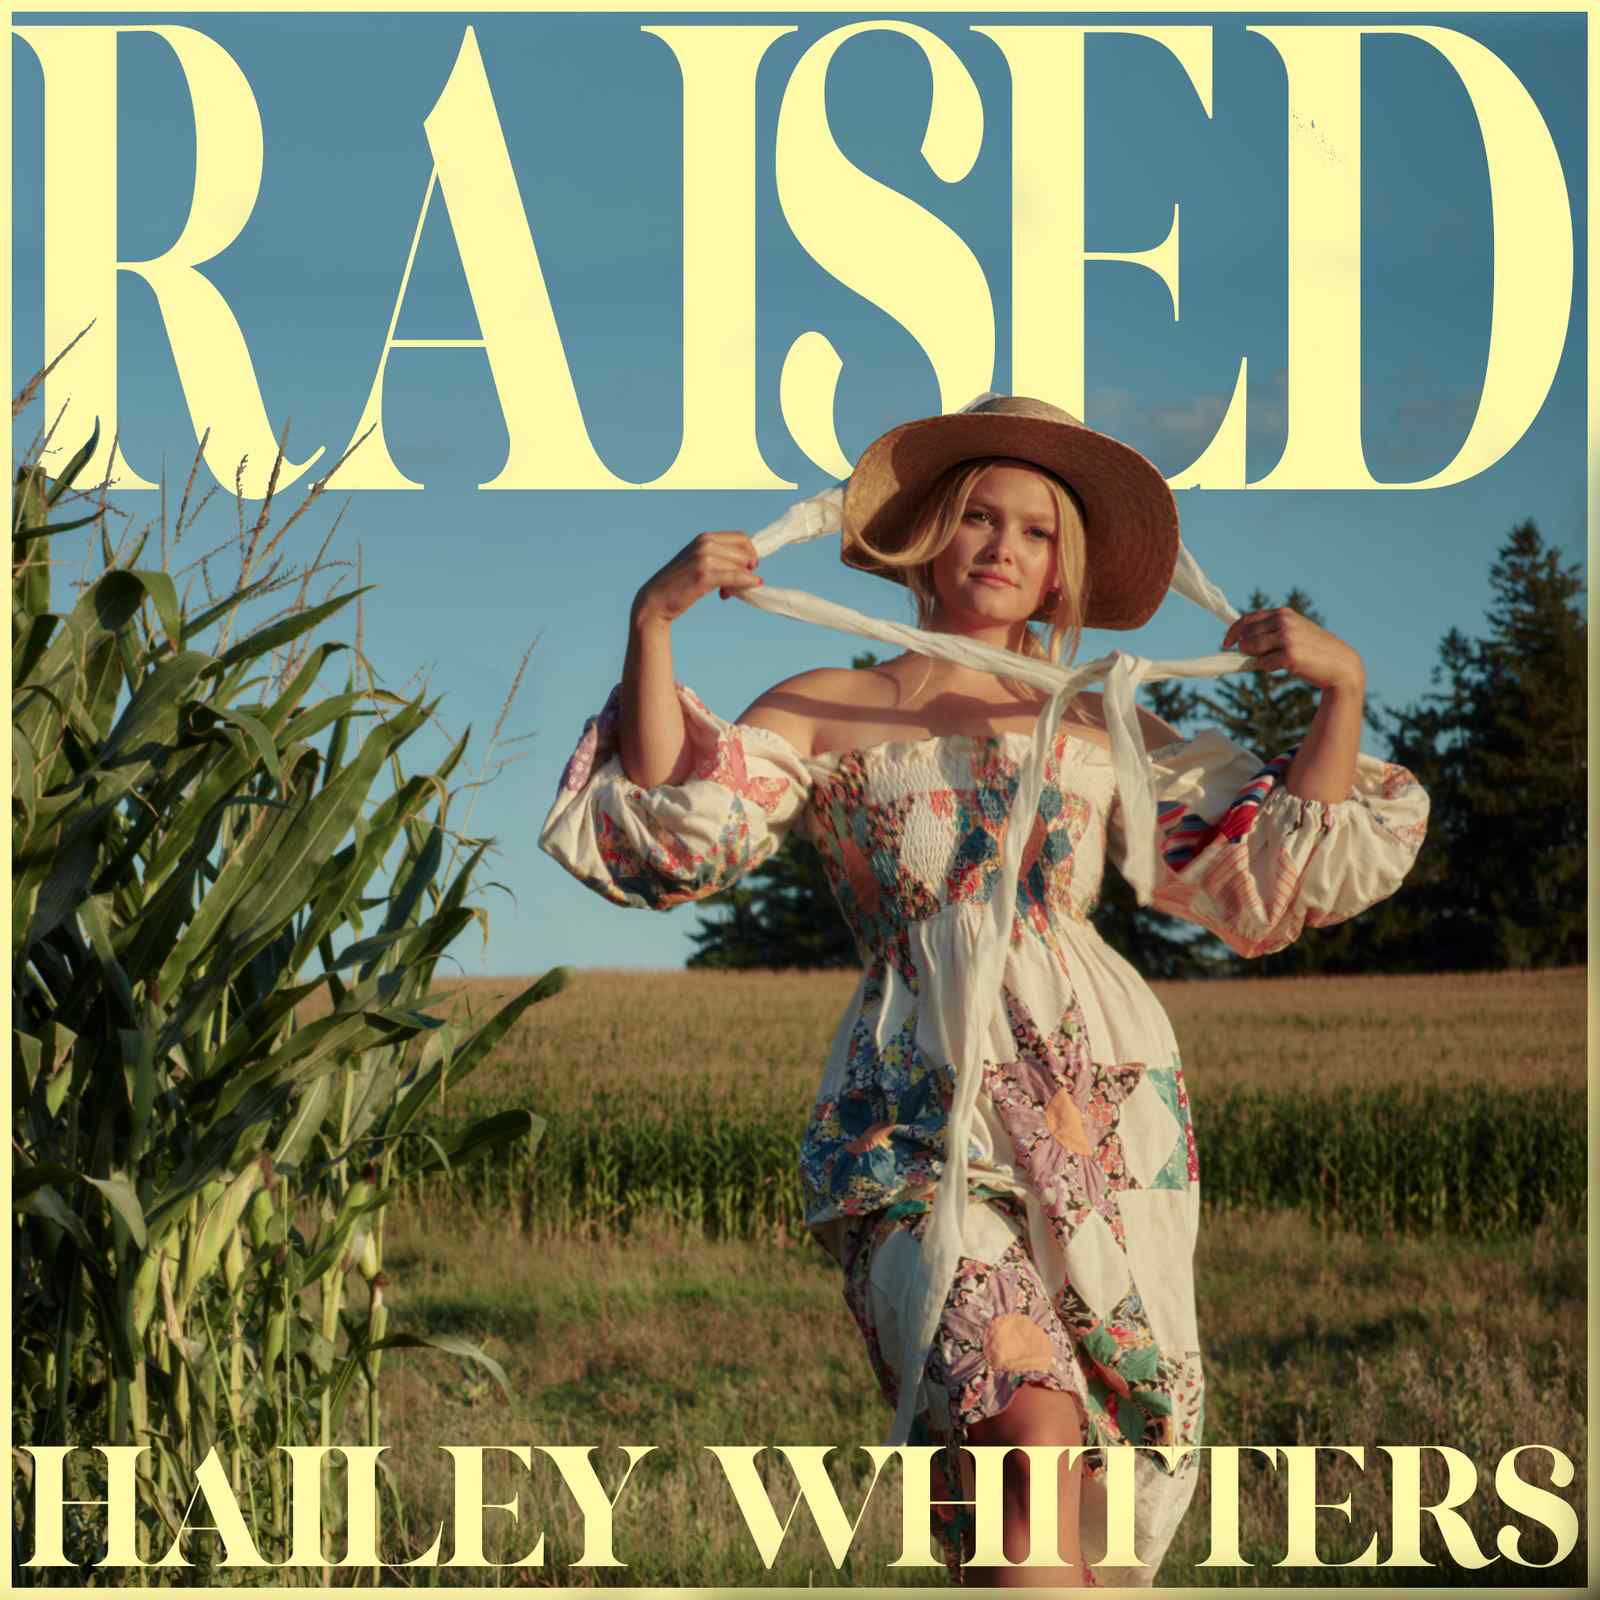 Raised by Hailey Whitters